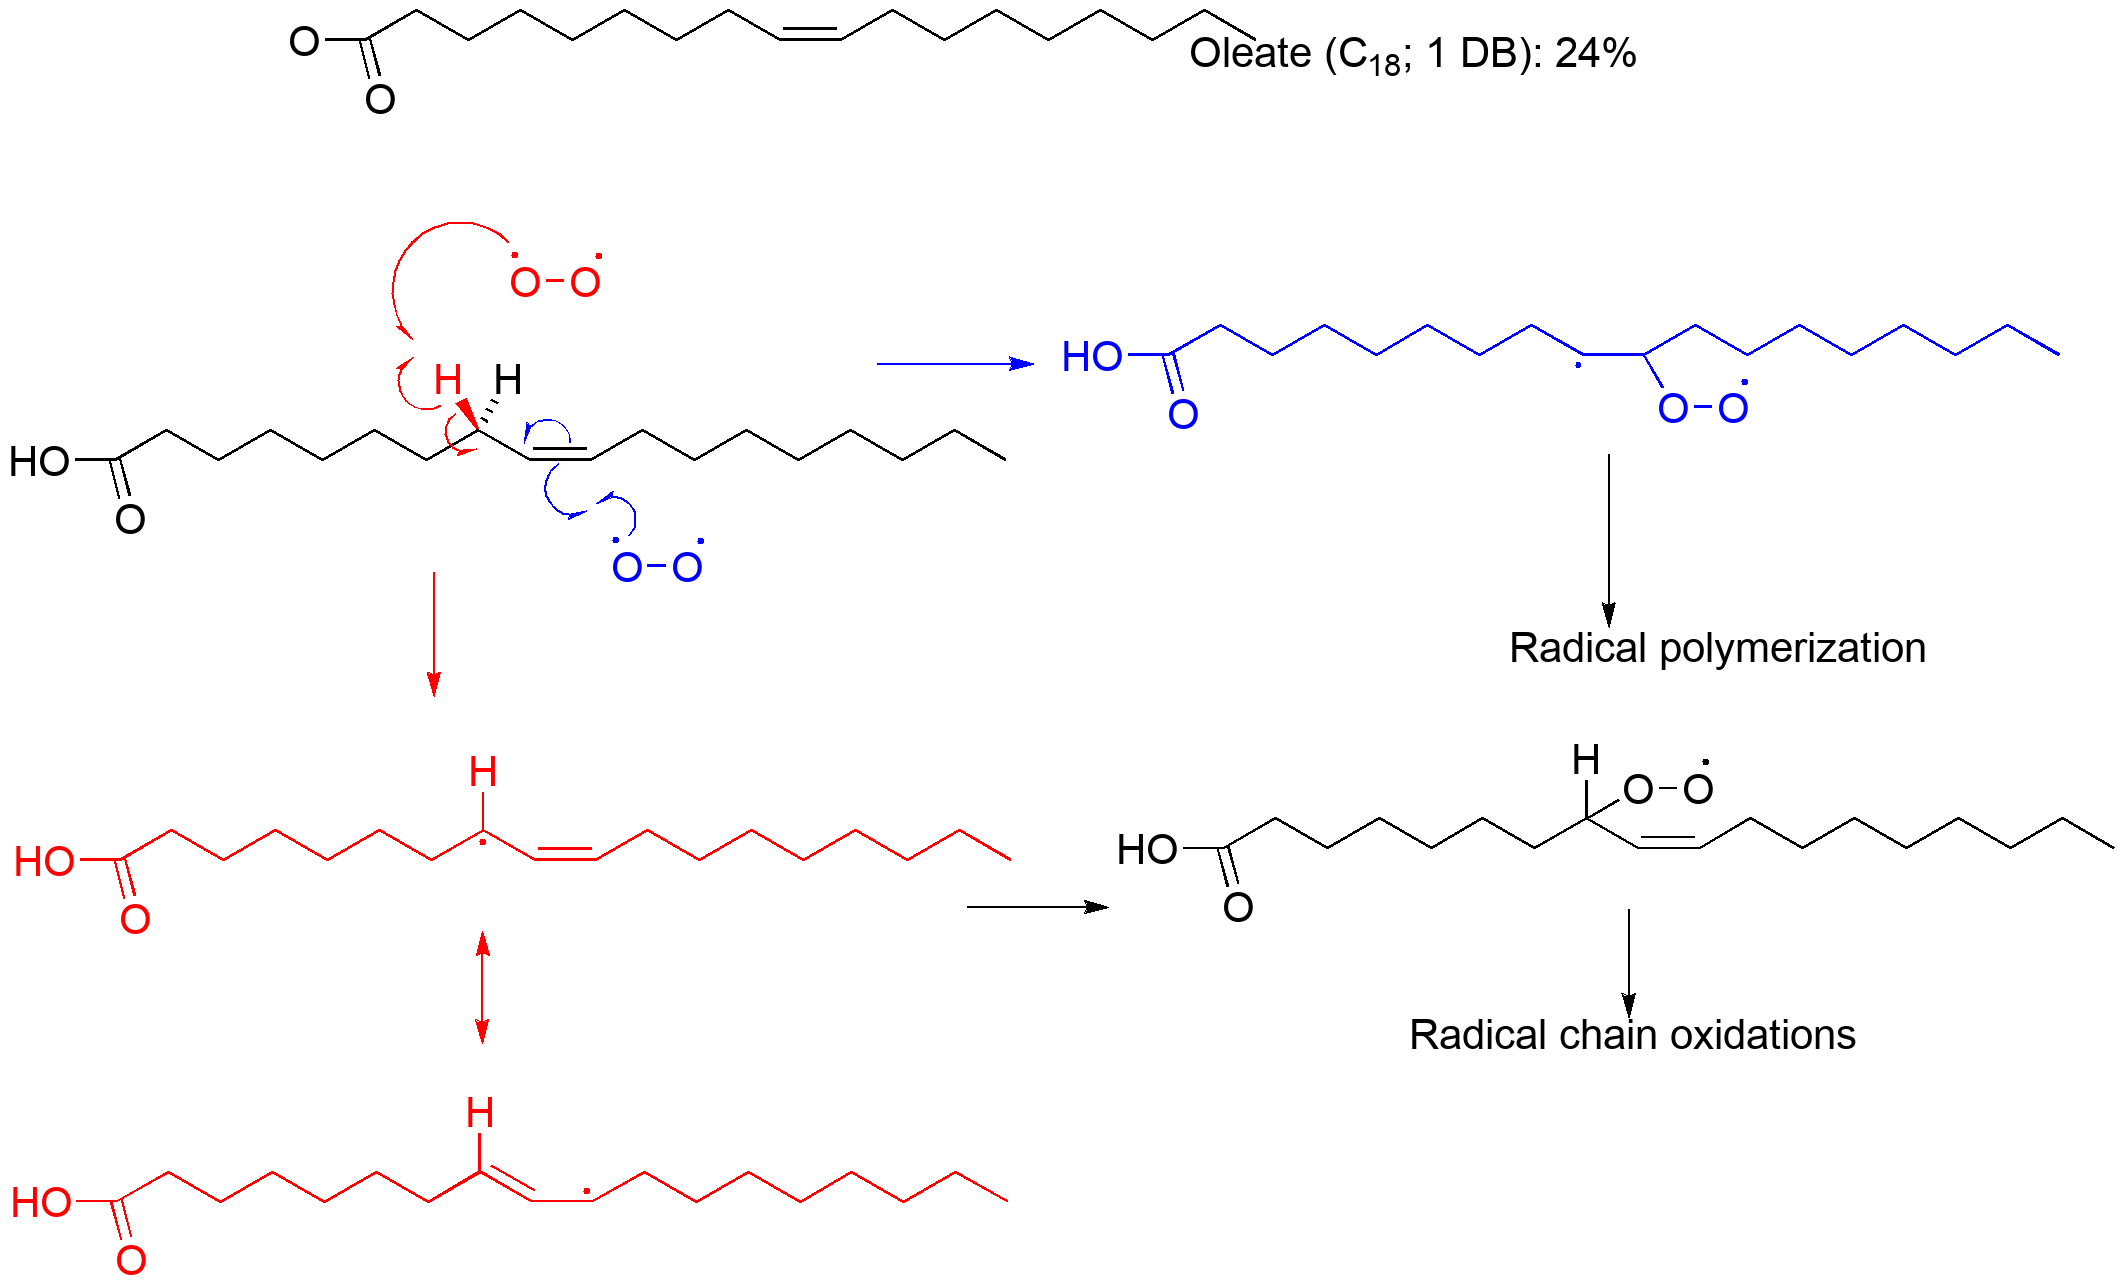 Radical reactions of O2 with the alkene in oleic acid.  Radical addition can lead to polymerization if the alkene concentration is high.  The alternative is C-H abstraction to make an allyl radical; this can add another O2 to make a C-O bond.  This sets up a cascade leading to oxidation of the alkyl chain and multiple products.